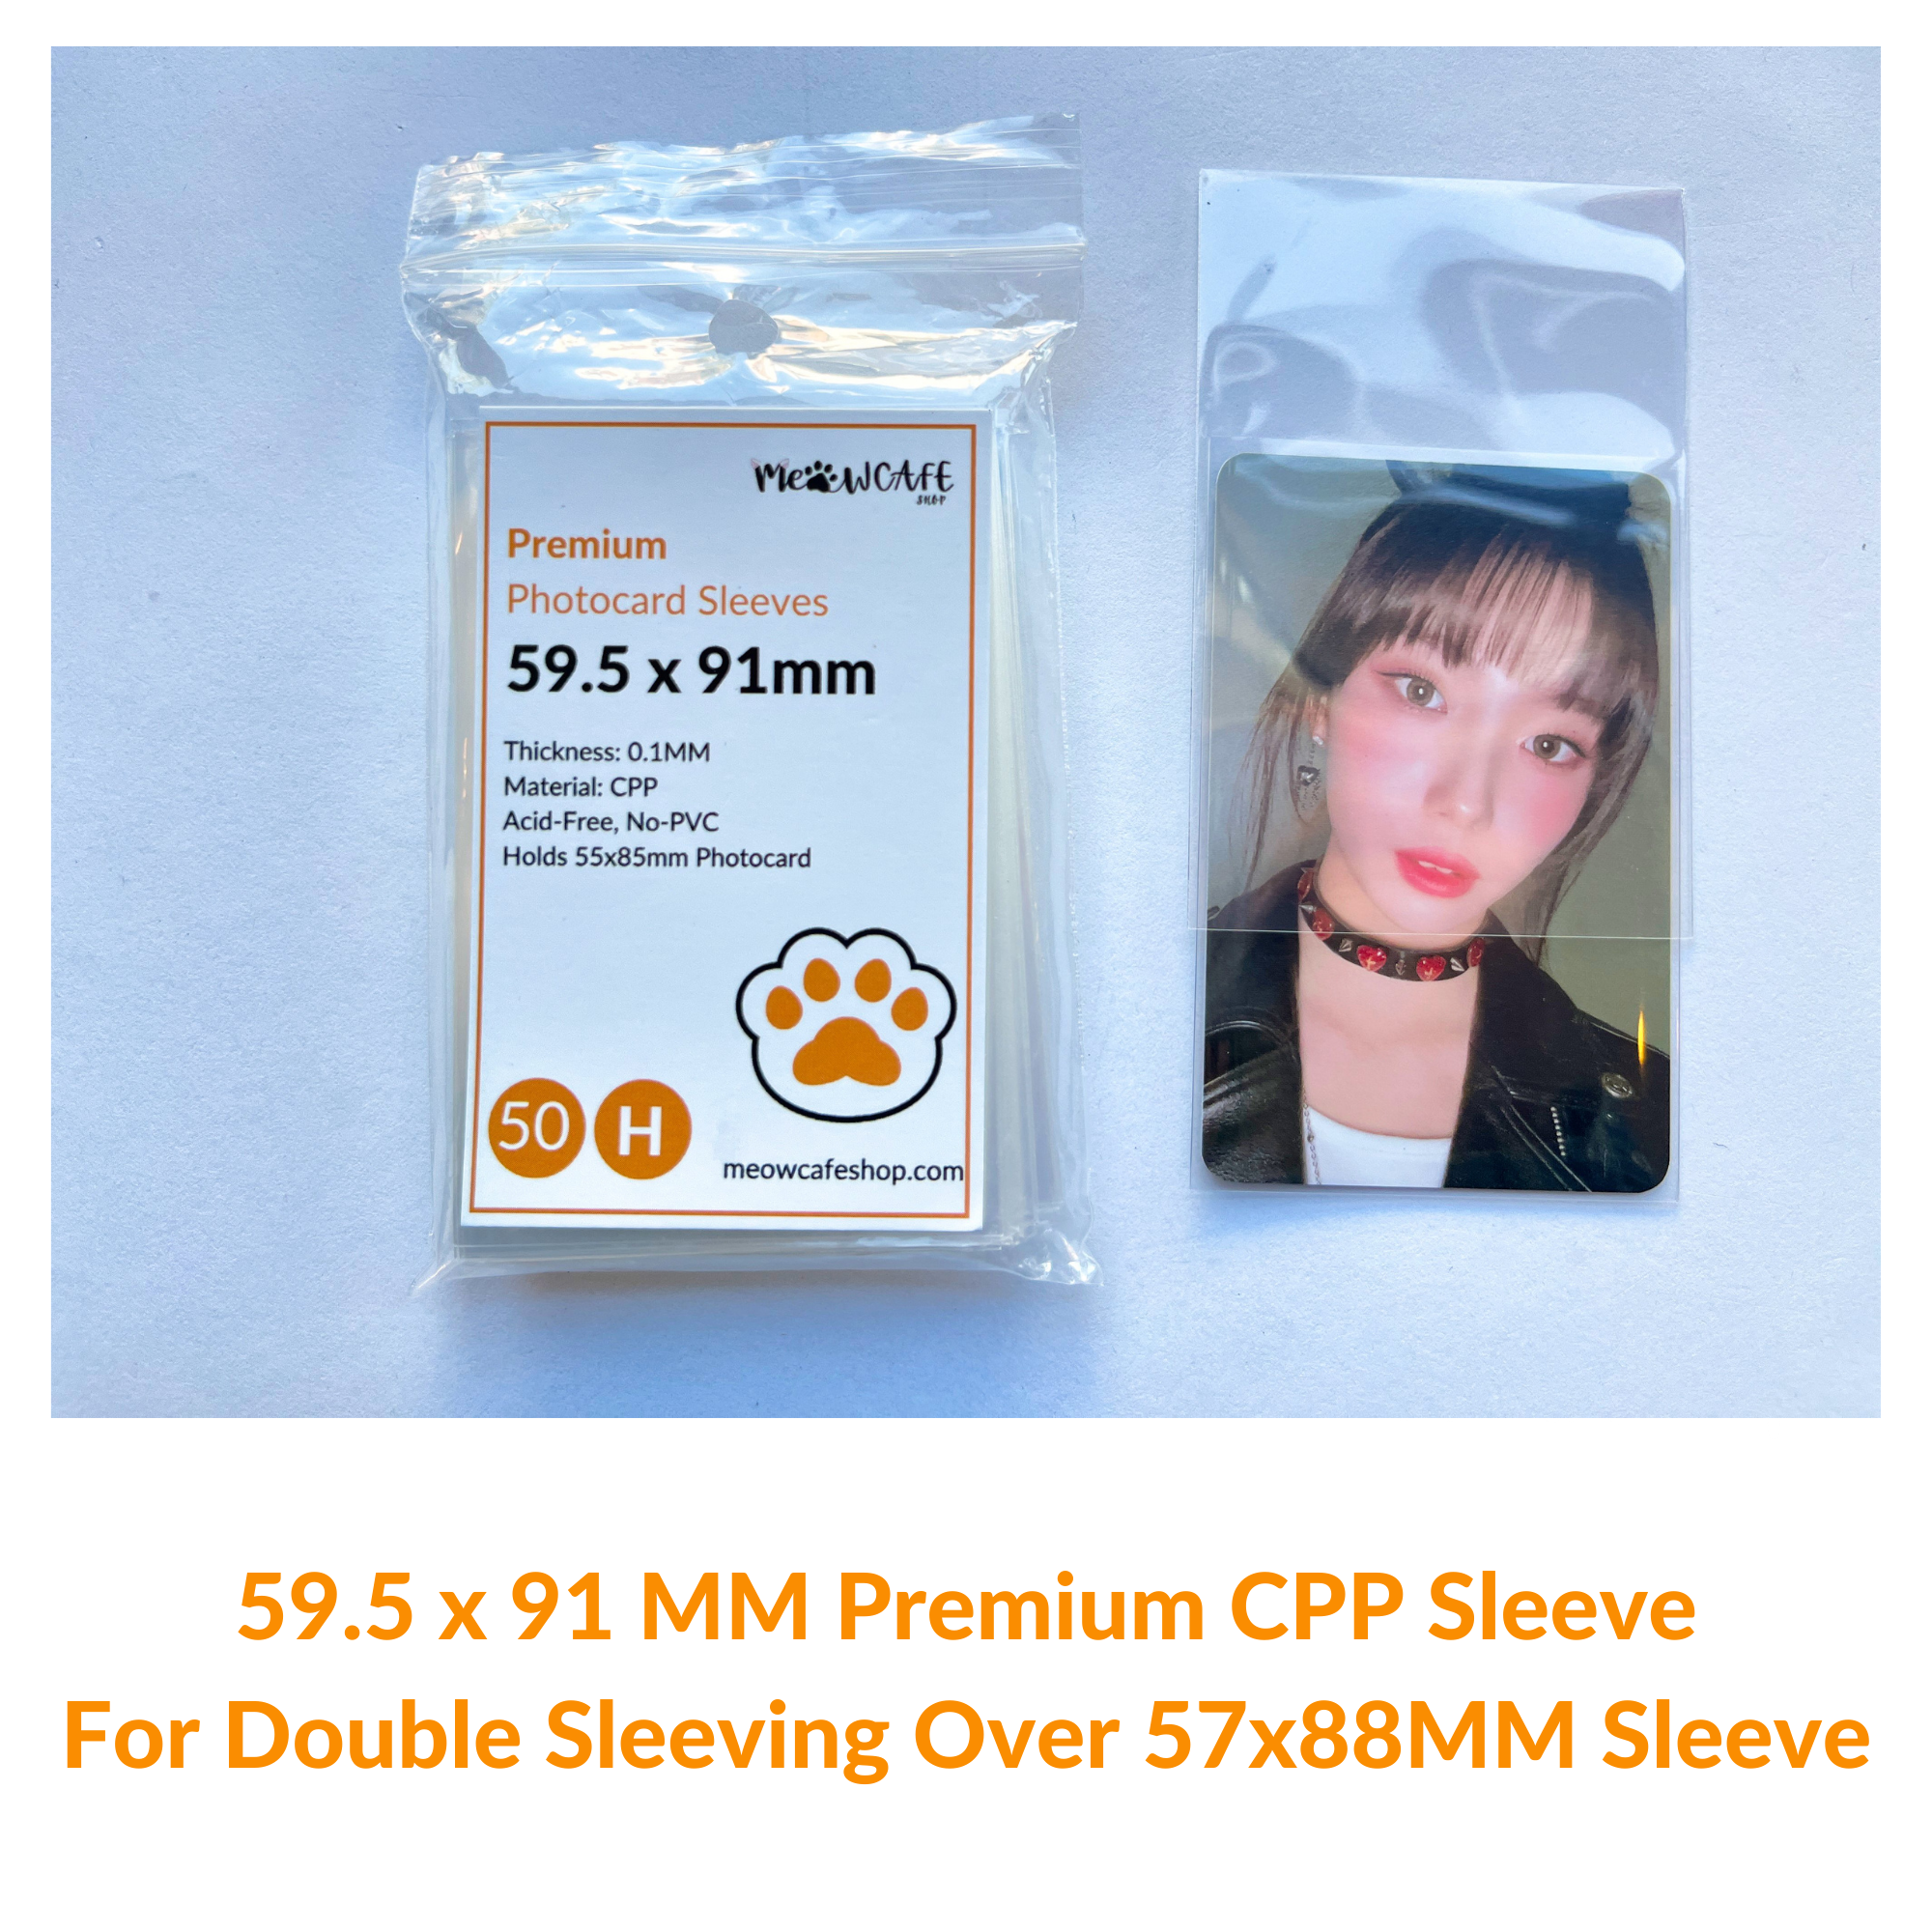 58x89MM] Meowcafe Premium CPP Card Sleeve for Kpop Photocards Perfect –  MeowCafeShop